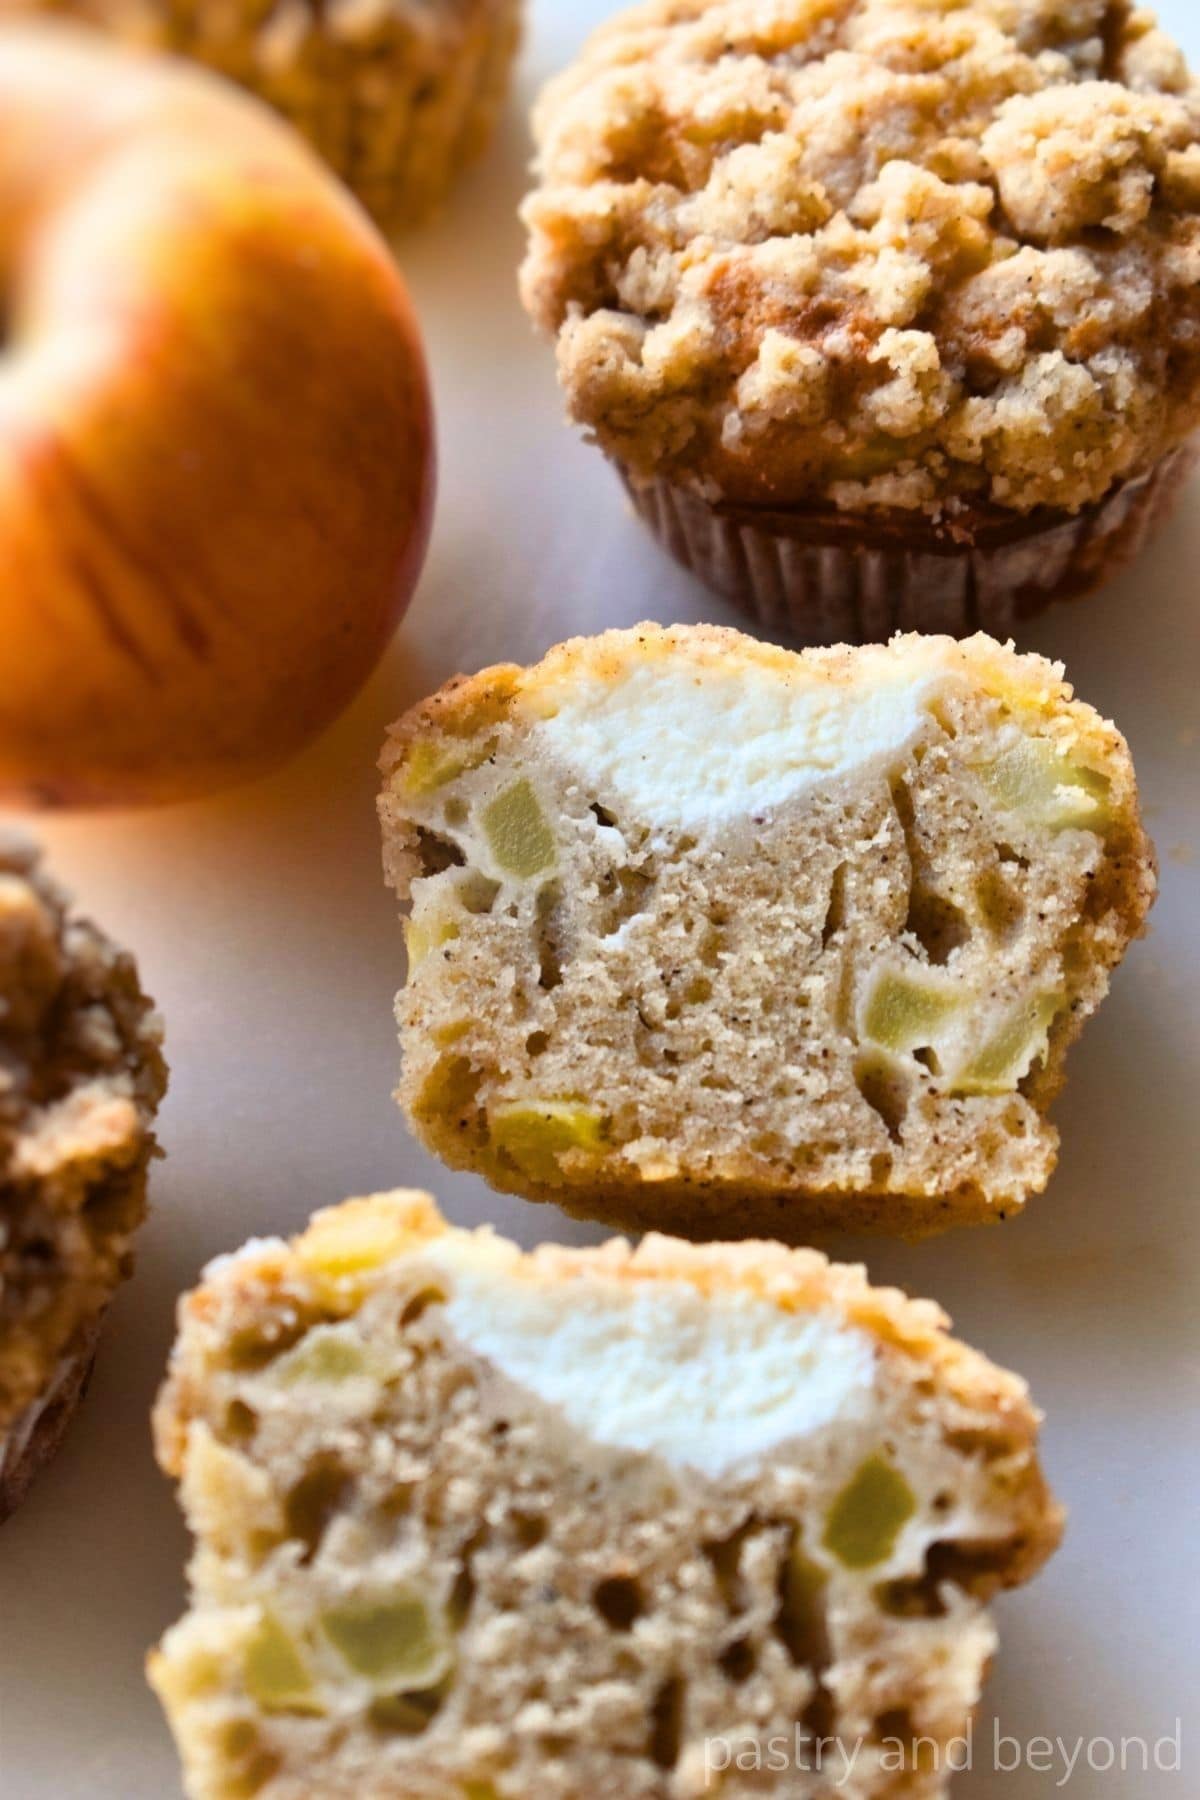 Apple cream cheese muffin that is cut in half and whole muffins on a white surface.